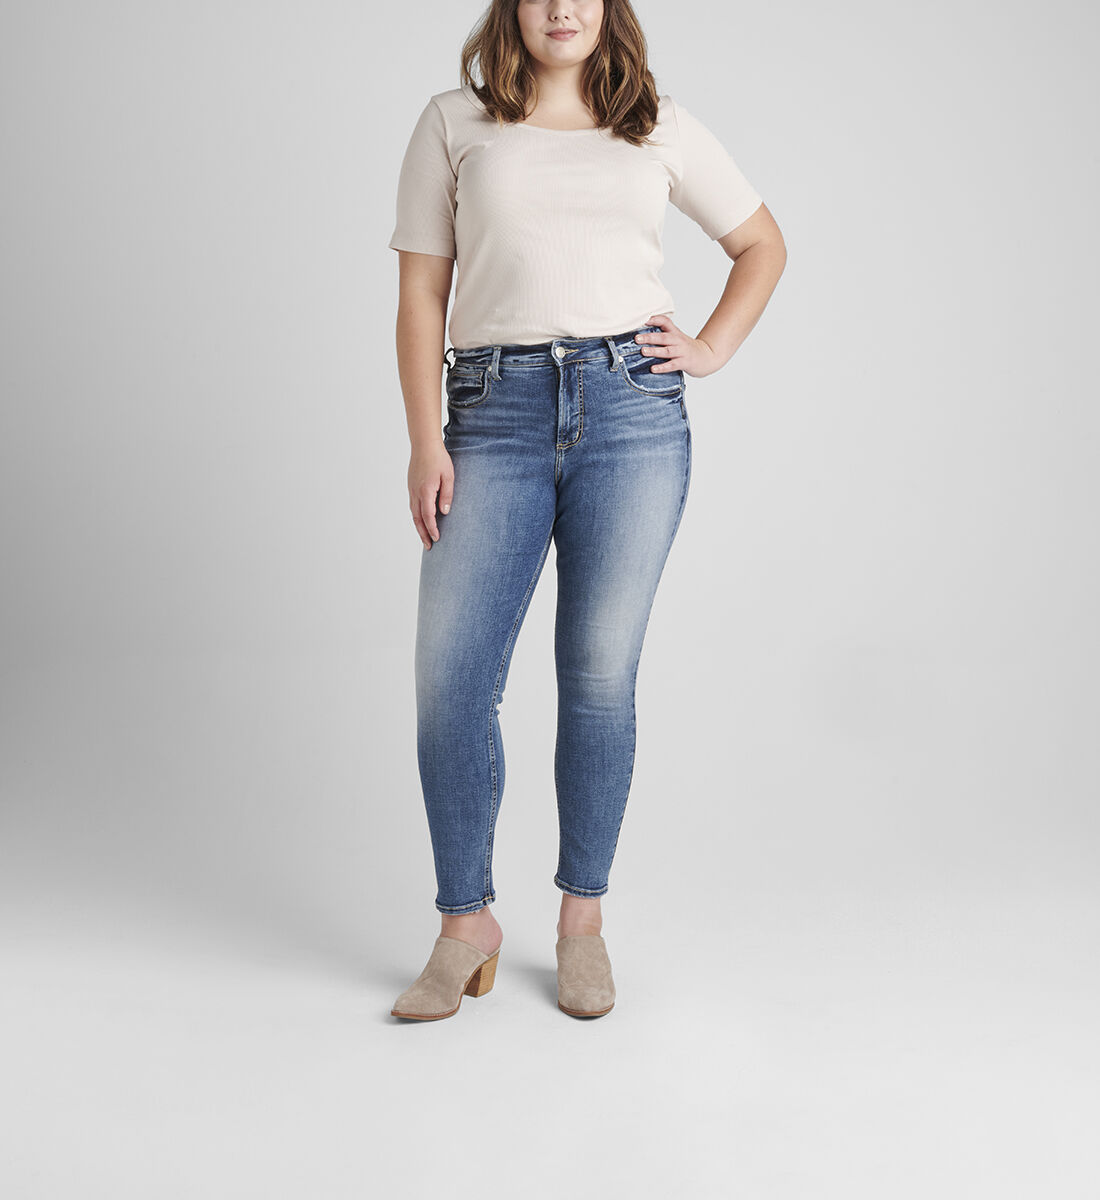 Avery High Rise Skinny Jeans Plus Size Front